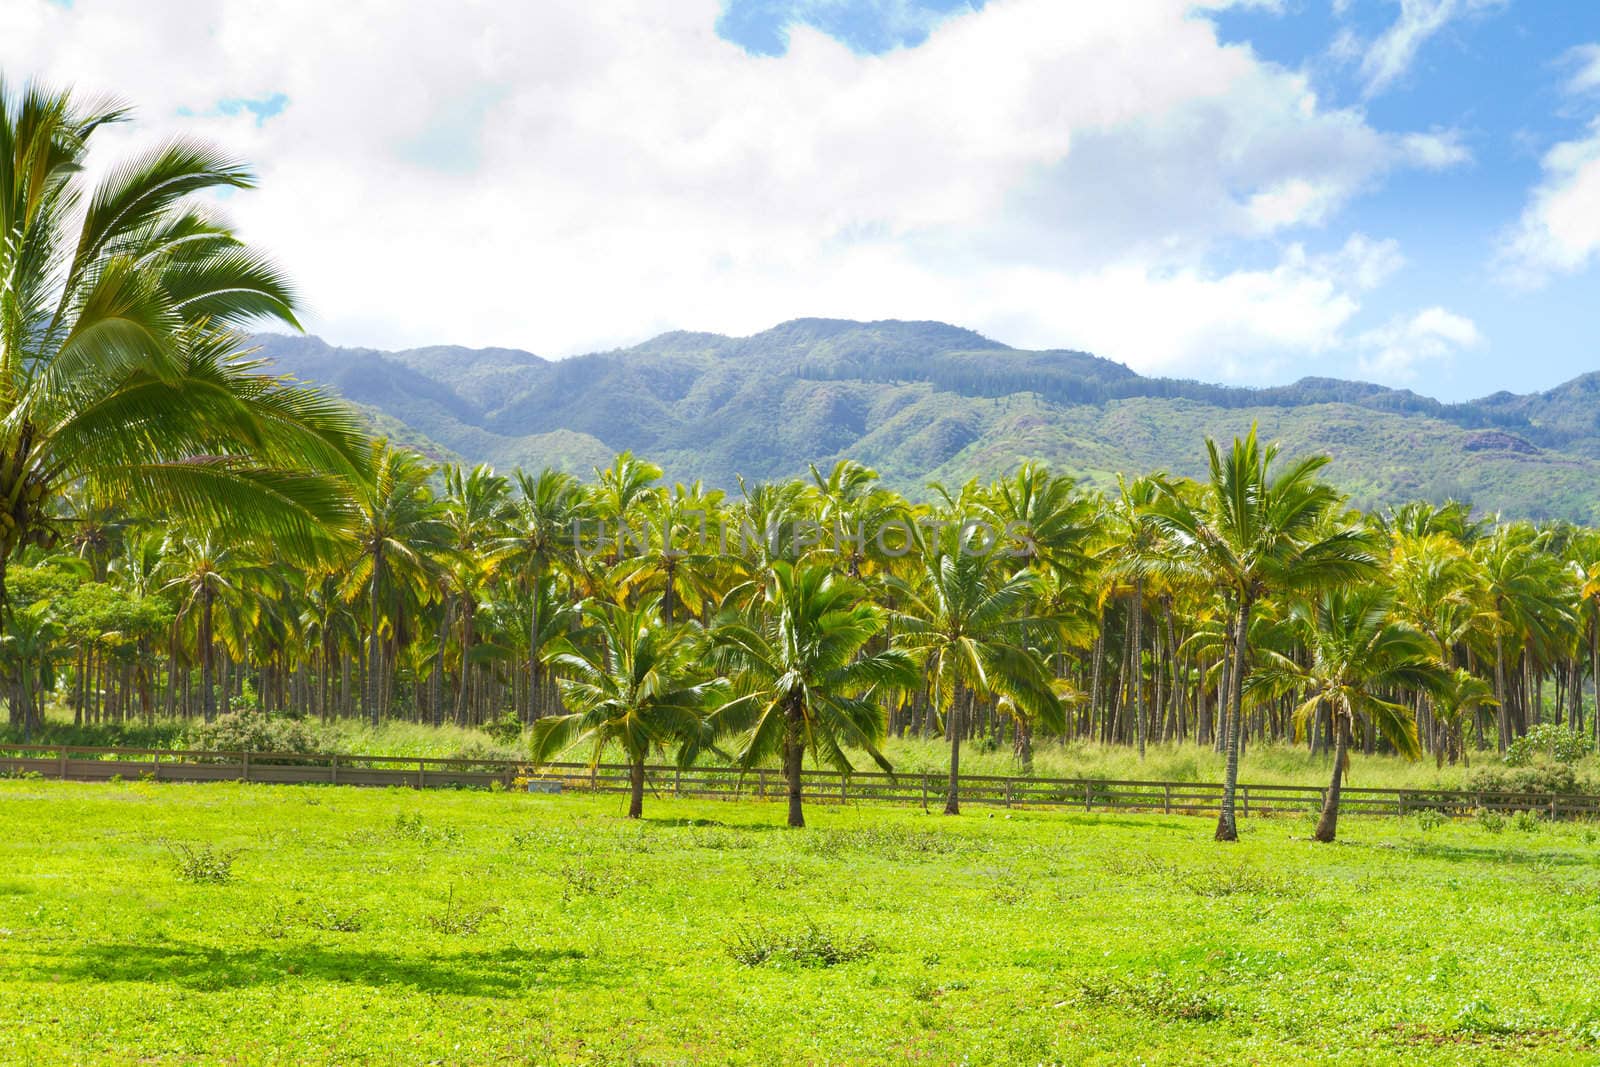 This farm grove of trees is a farming operation where coconuts are grown and harvested in Hawaii along the north shore of Oahu.